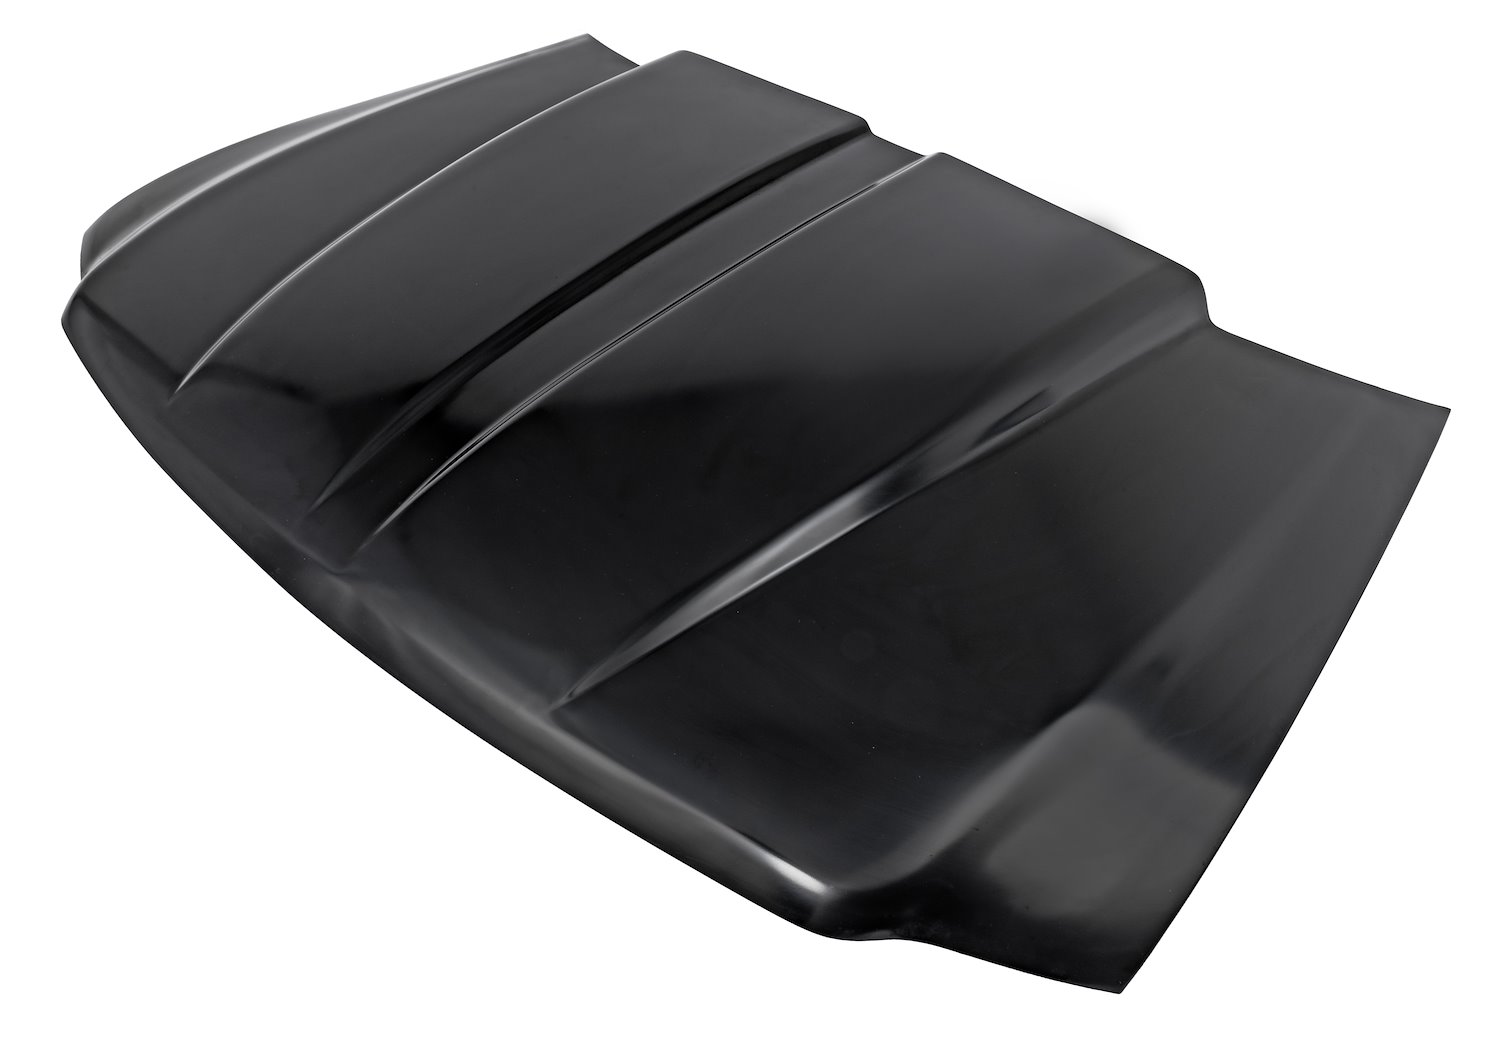 Cowl Induction Hood for 1997-2003 Ford F150 [Dual Cowl]